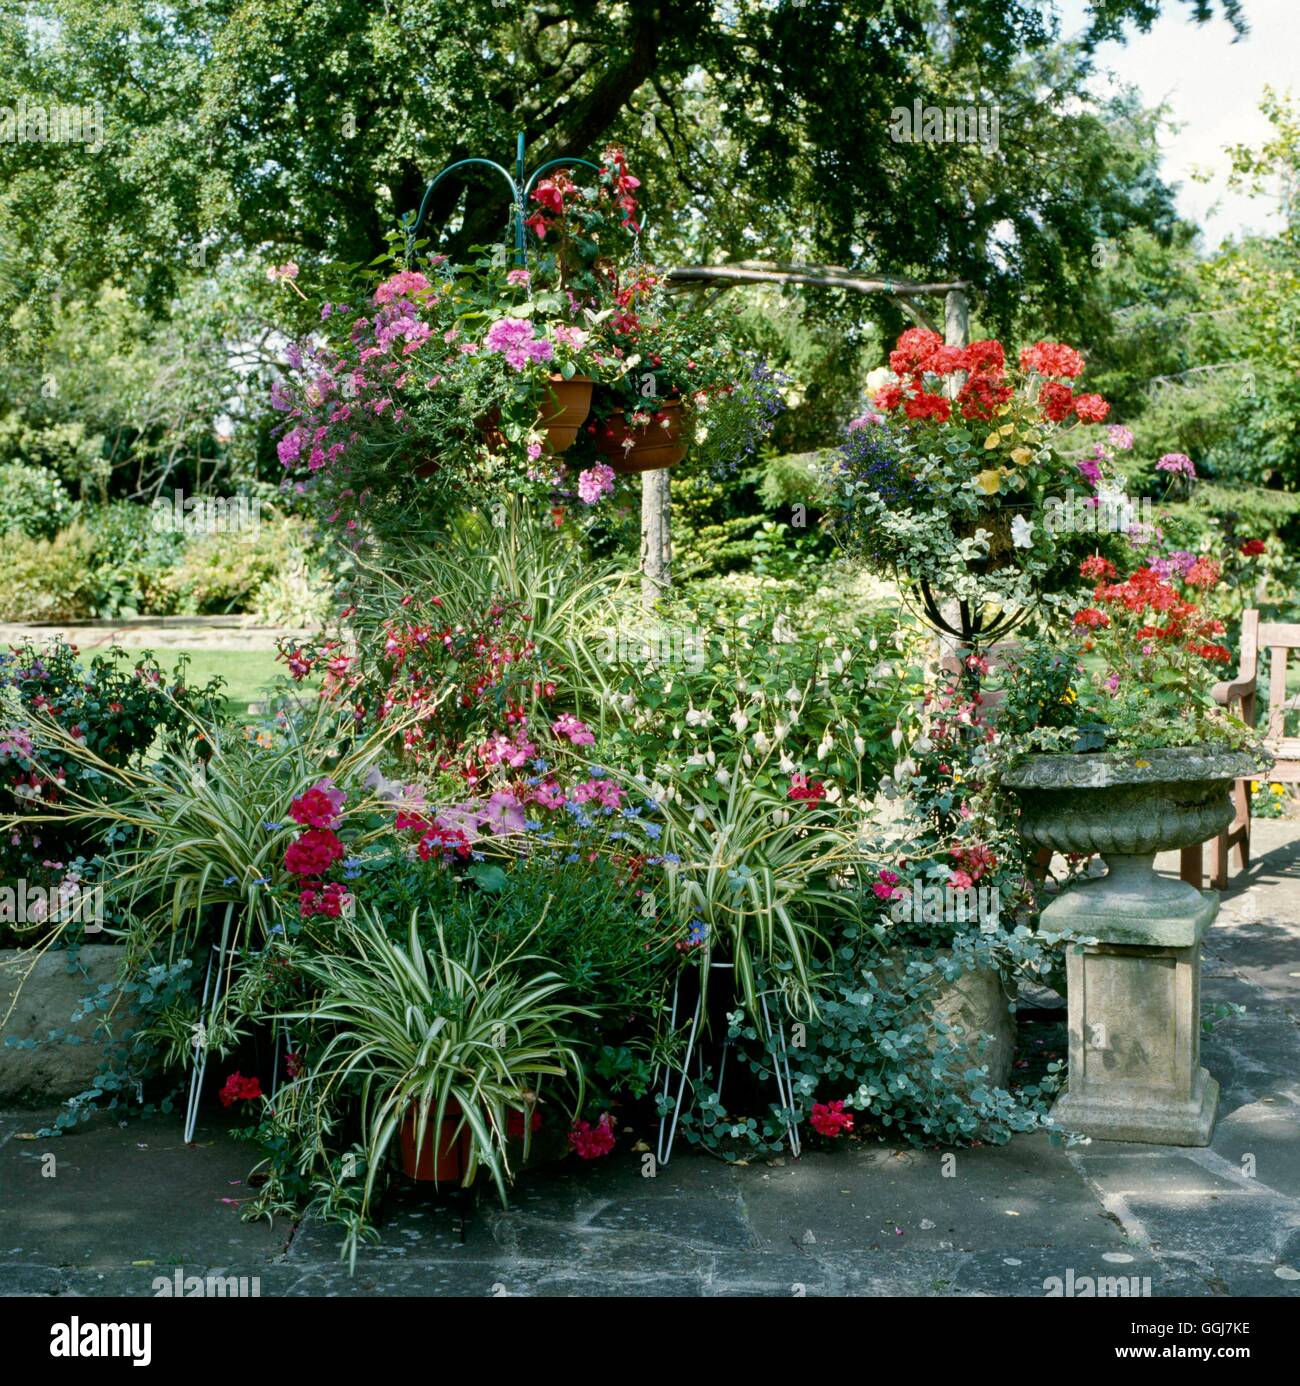 Containers - Annual - Pots and baskets on frames planted with annuals   CTR045269     Photos Horticu Stock Photo